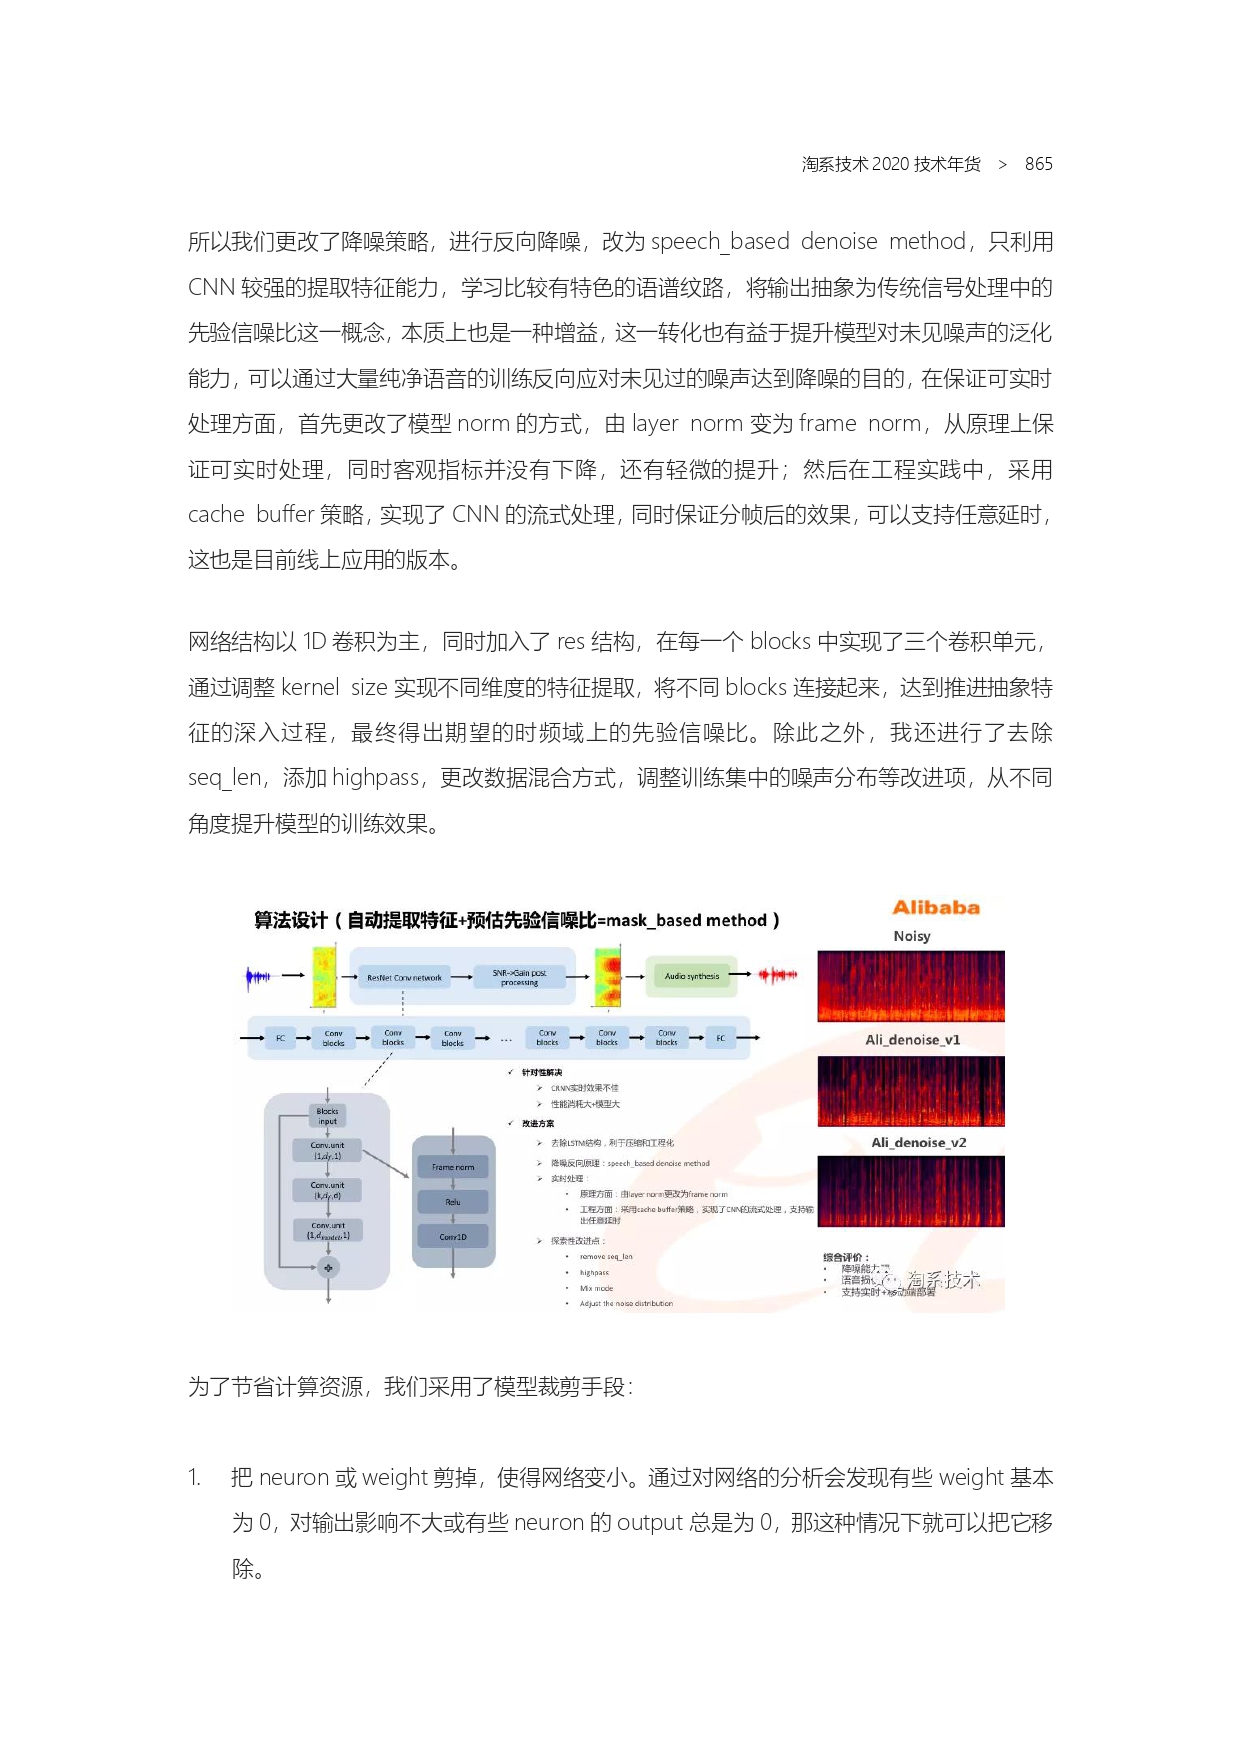 The Complete Works of Tao Technology 2020-571-1189-1-300_page-0295.jpg